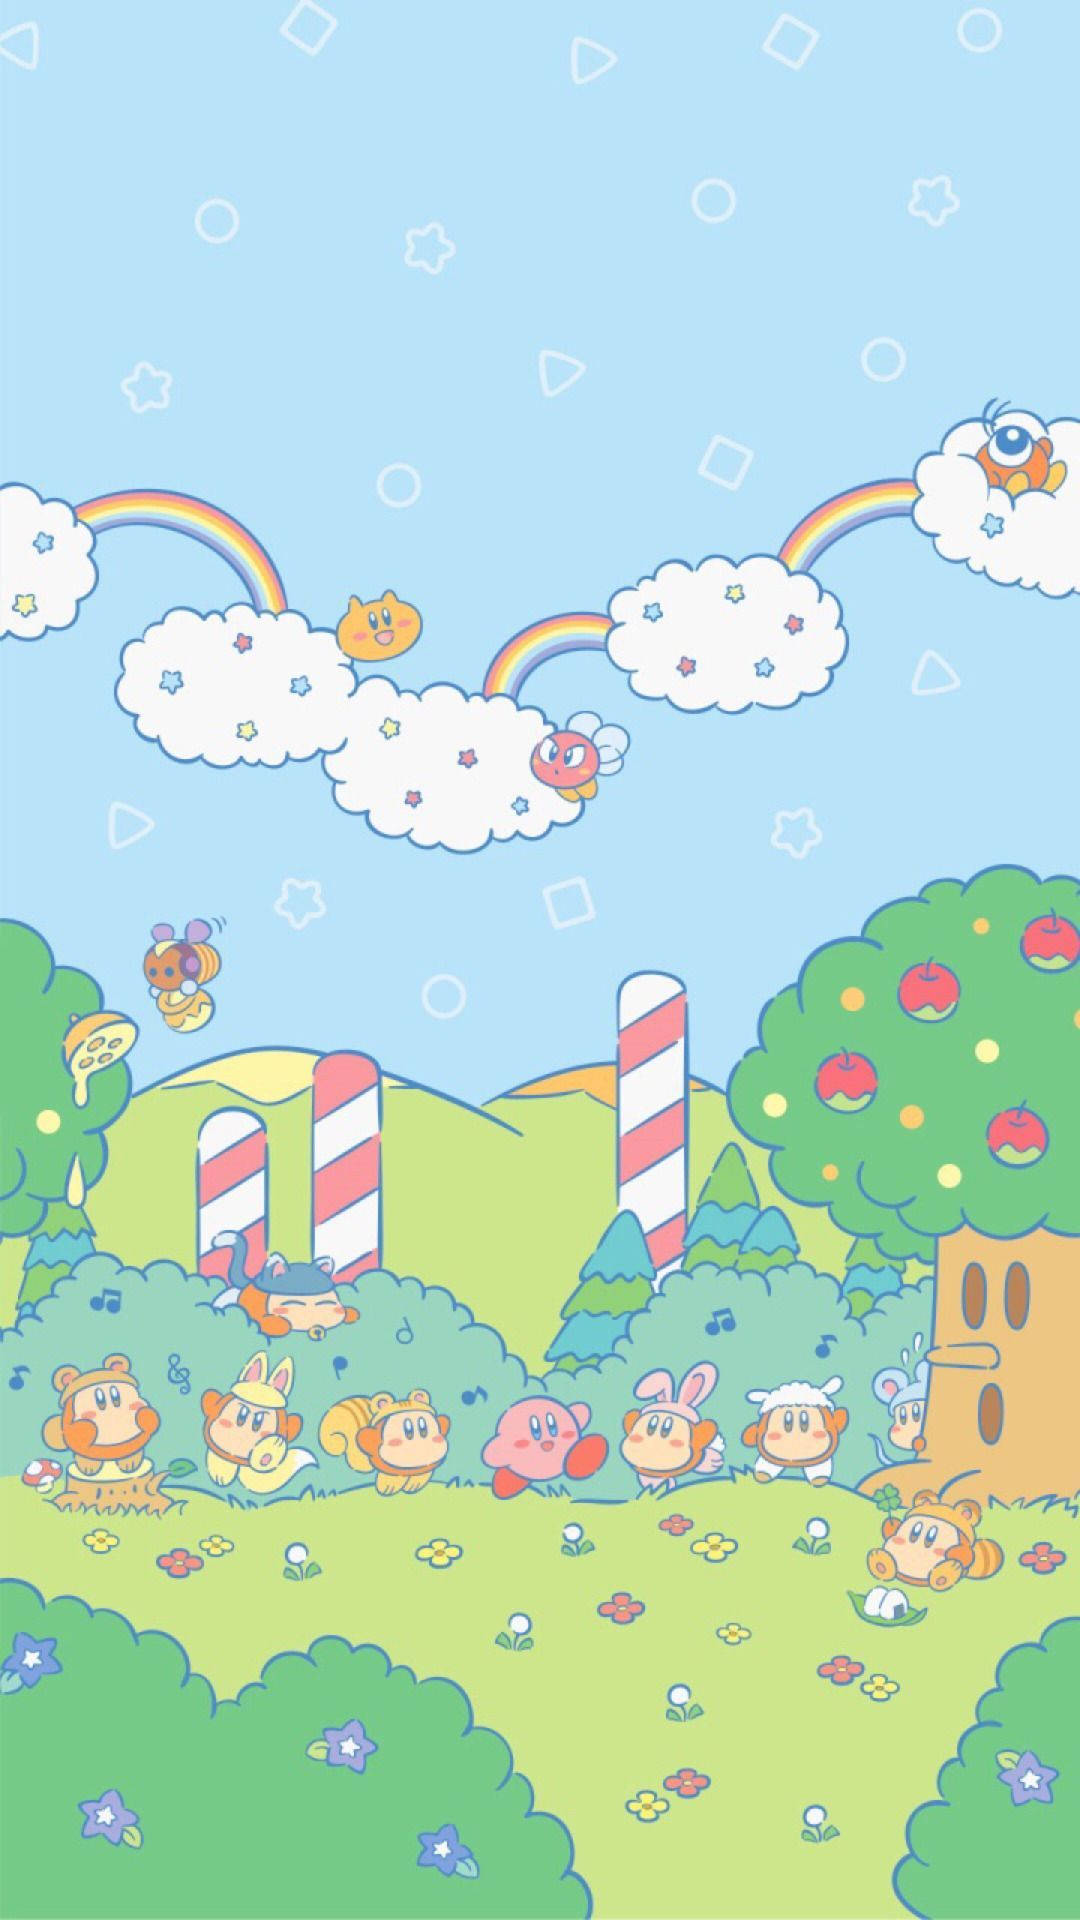 An HD quality wallpaper of Kirby and his friends playing in a wonderful place